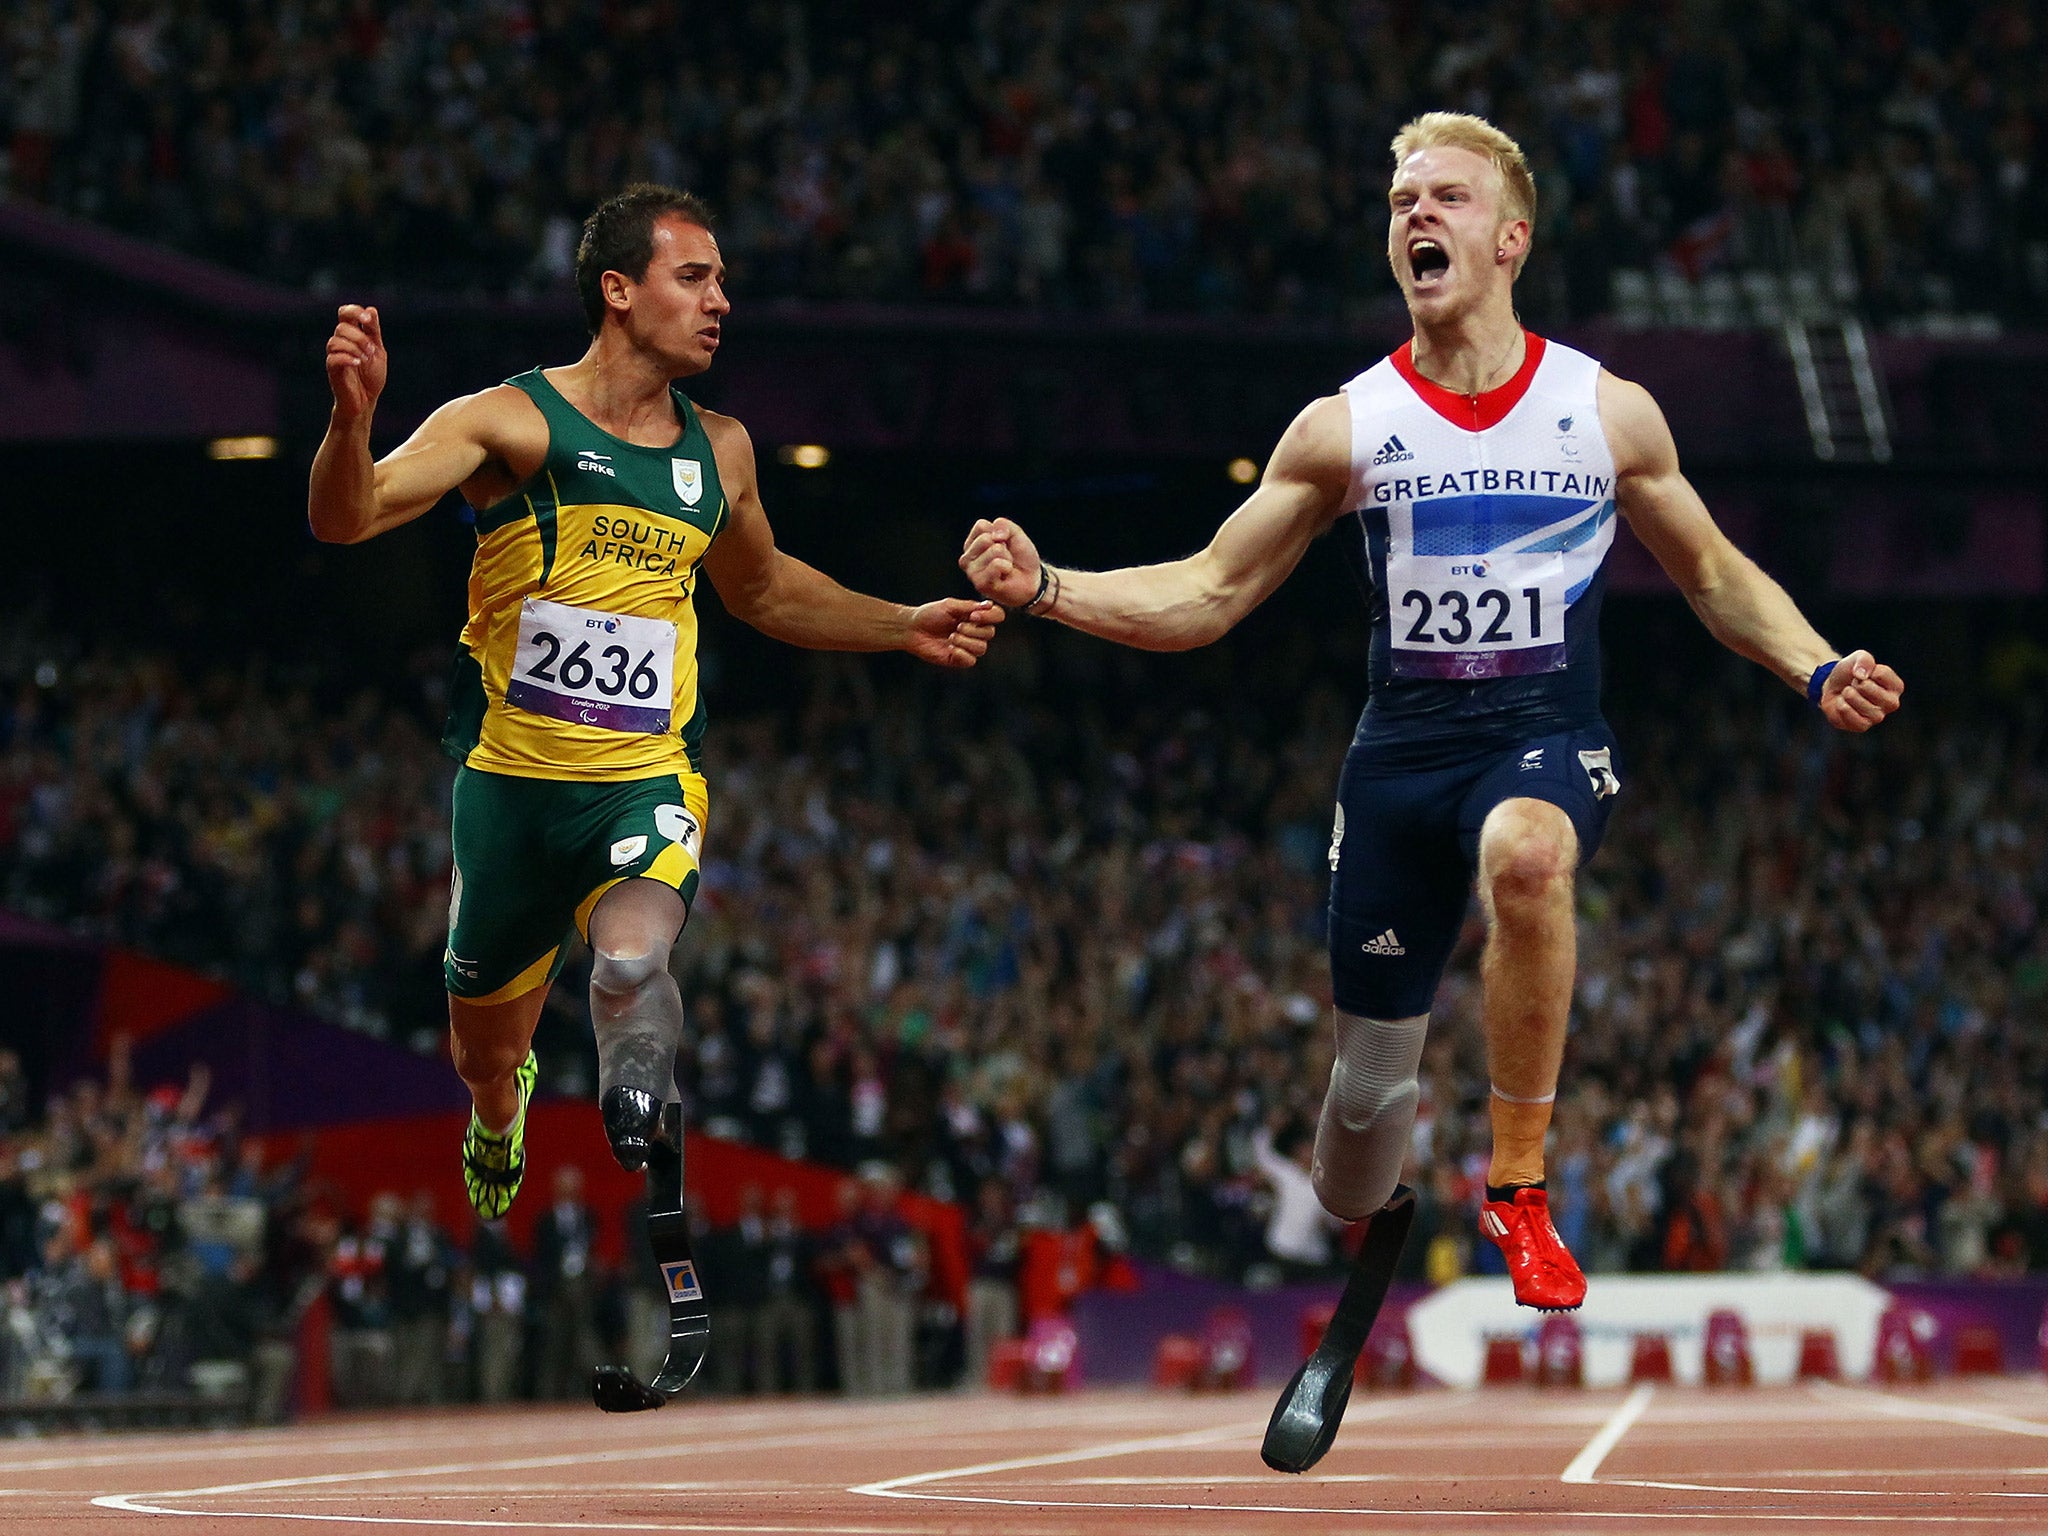 Jonnie Peacock won gold in the men's T44 100m final at London 2012